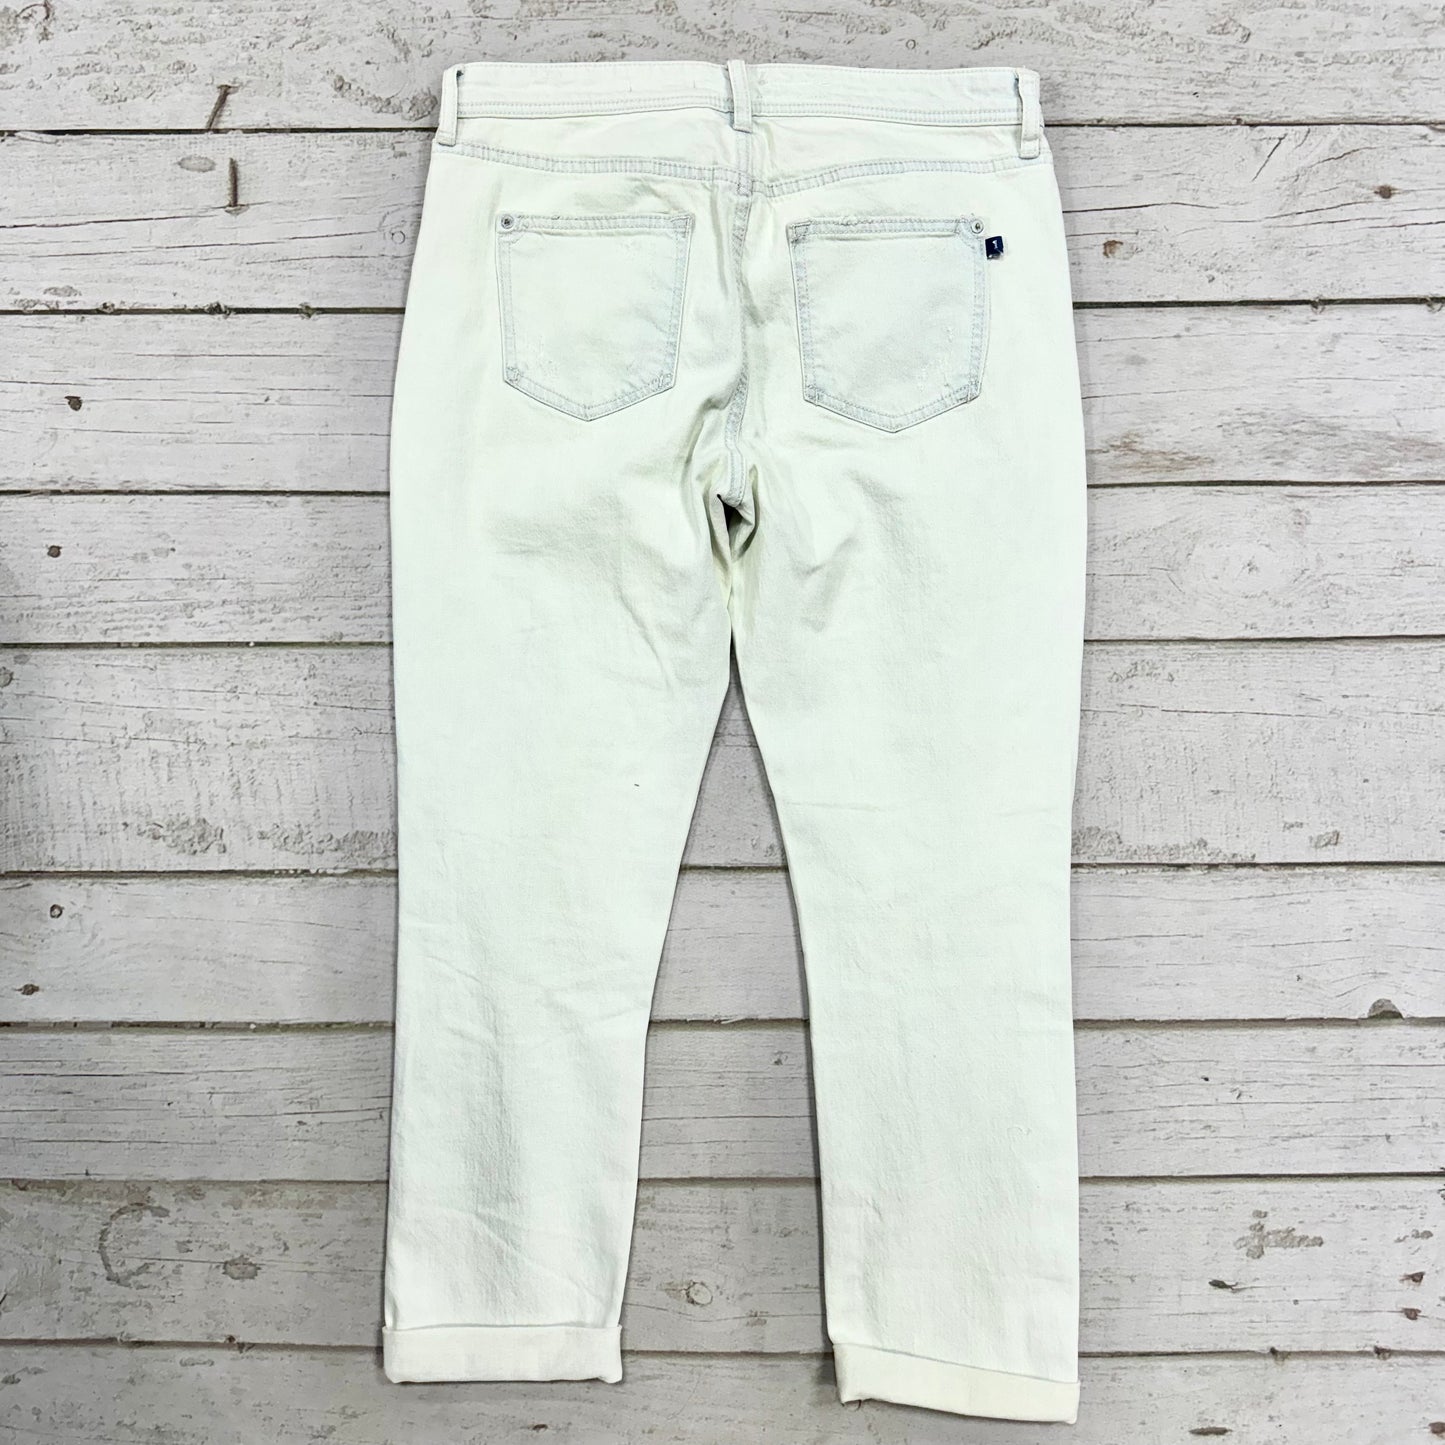 Jeans Relaxed/boyfriend By Pilcro  Size: 8